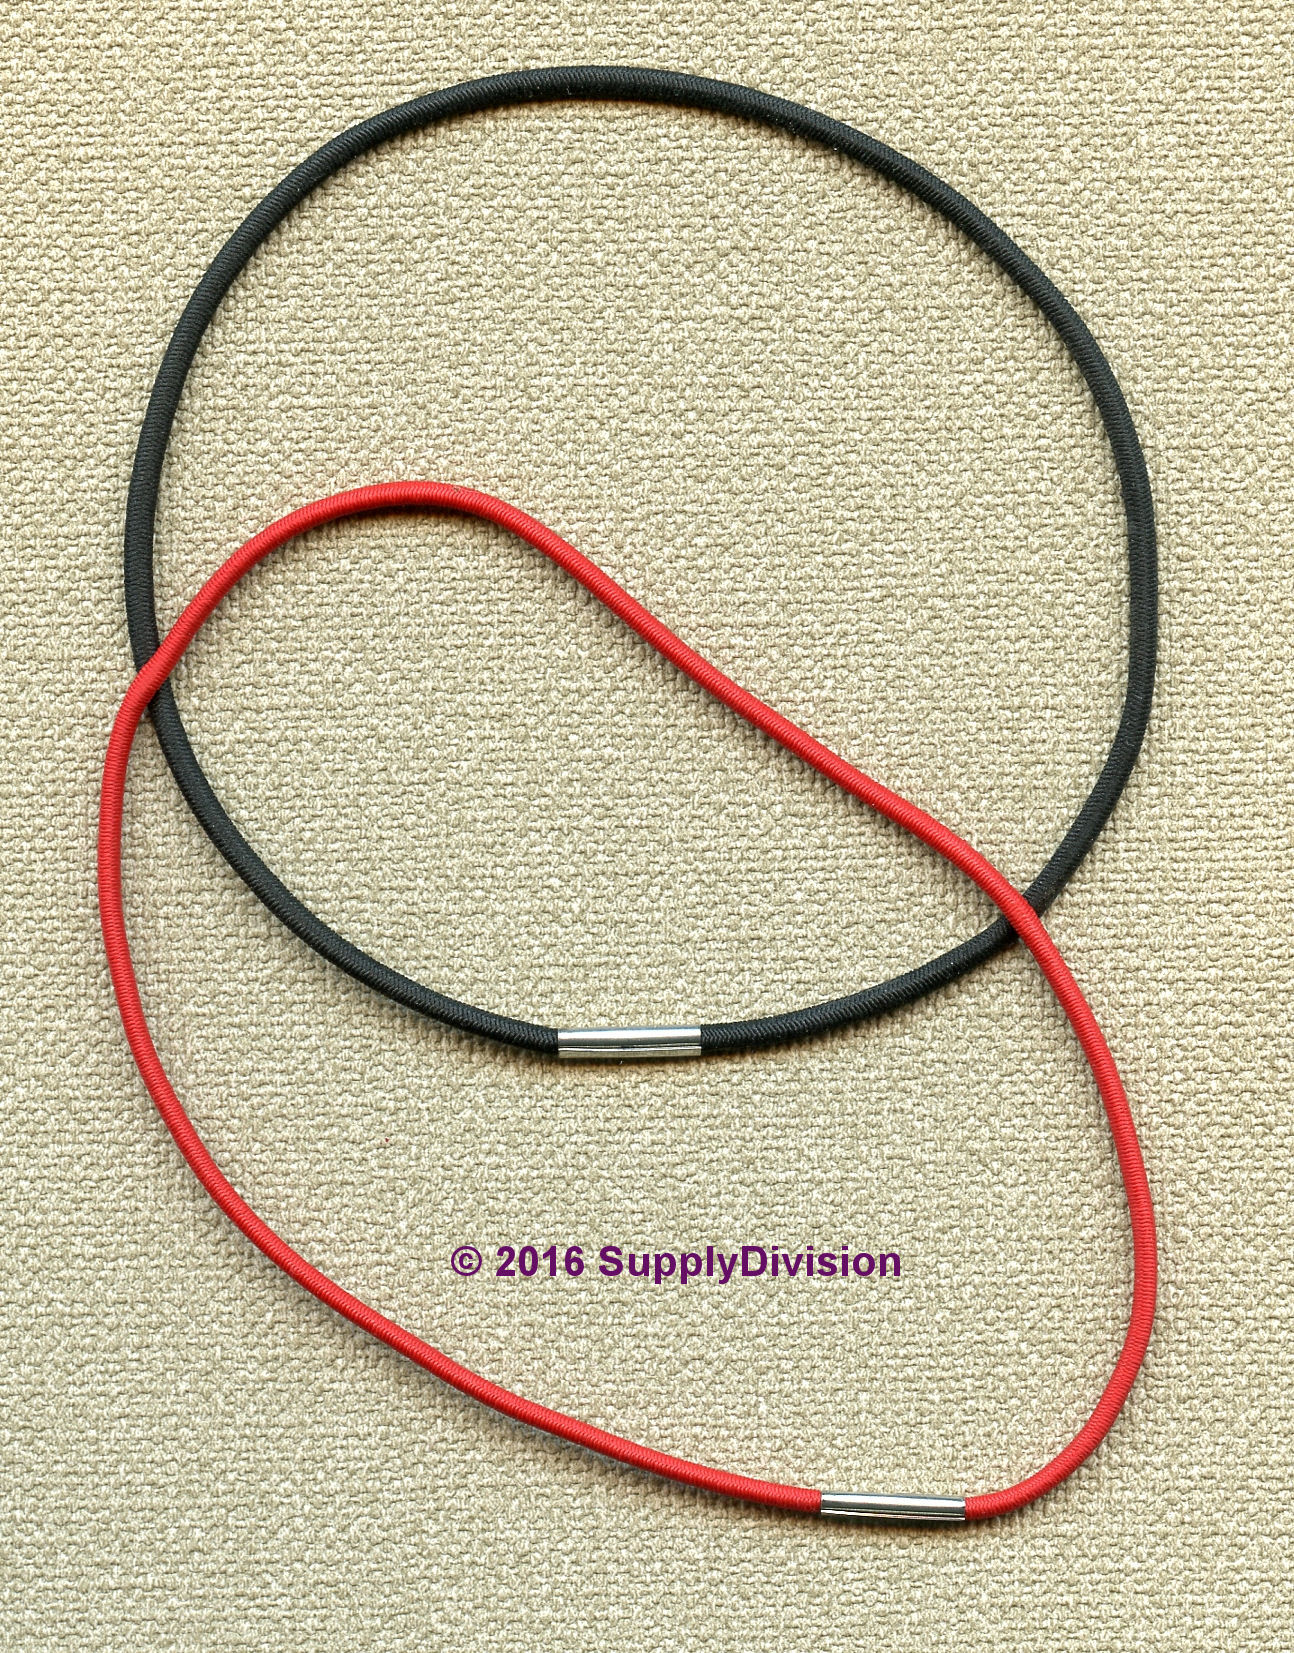 A6 Elastic ring 260mm(Approx) circ, 100 pack.